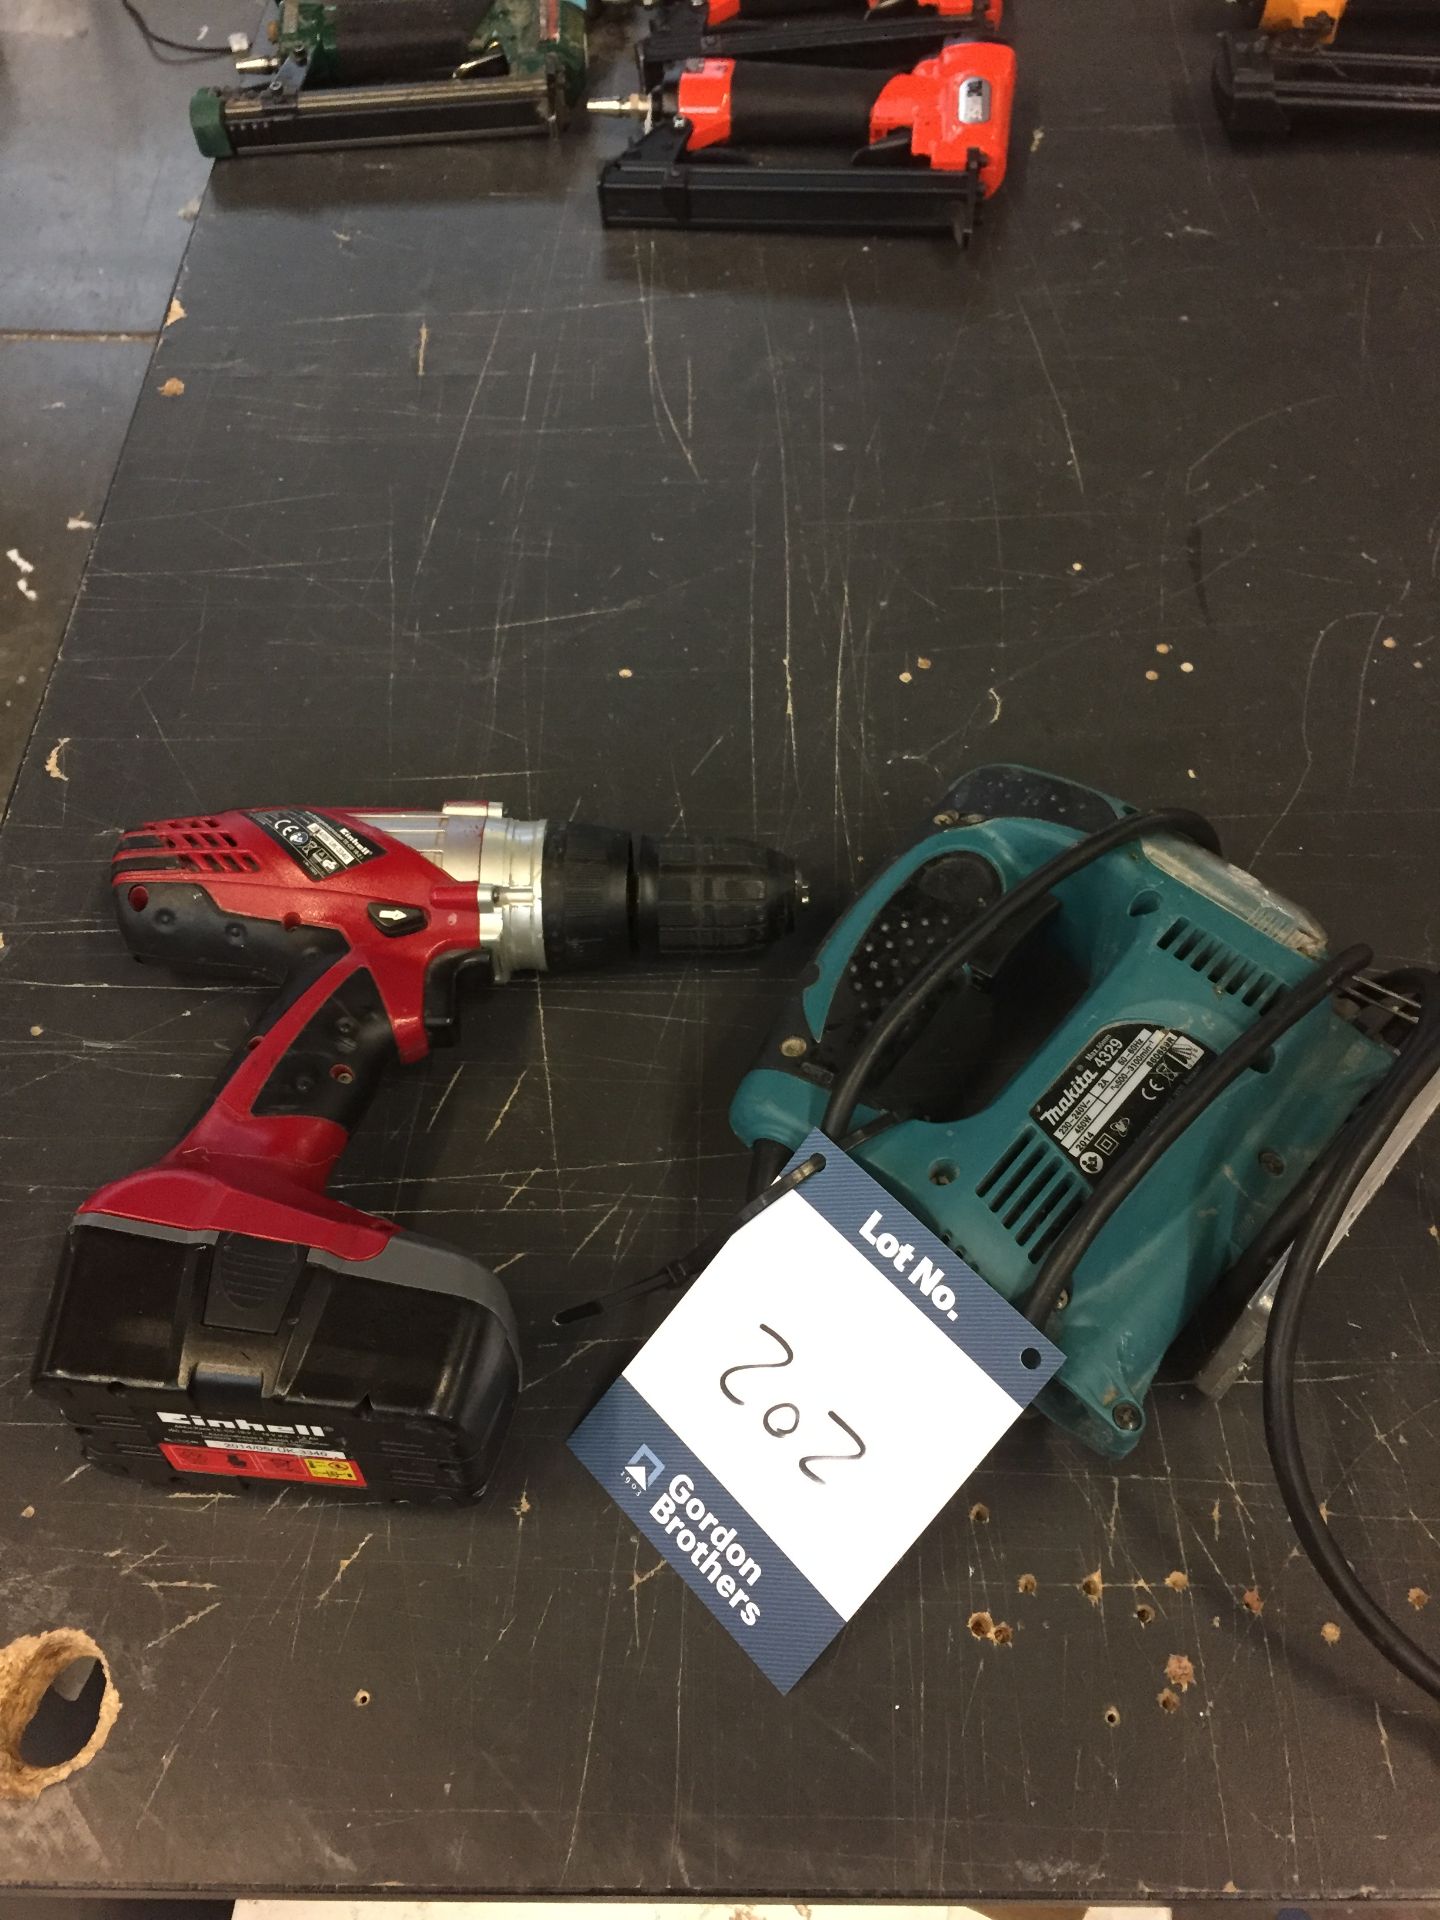 Makita 4329 jig saw (240v) and Einhell TE-CD 18-2i cordless drill (no charger) ** This lot is